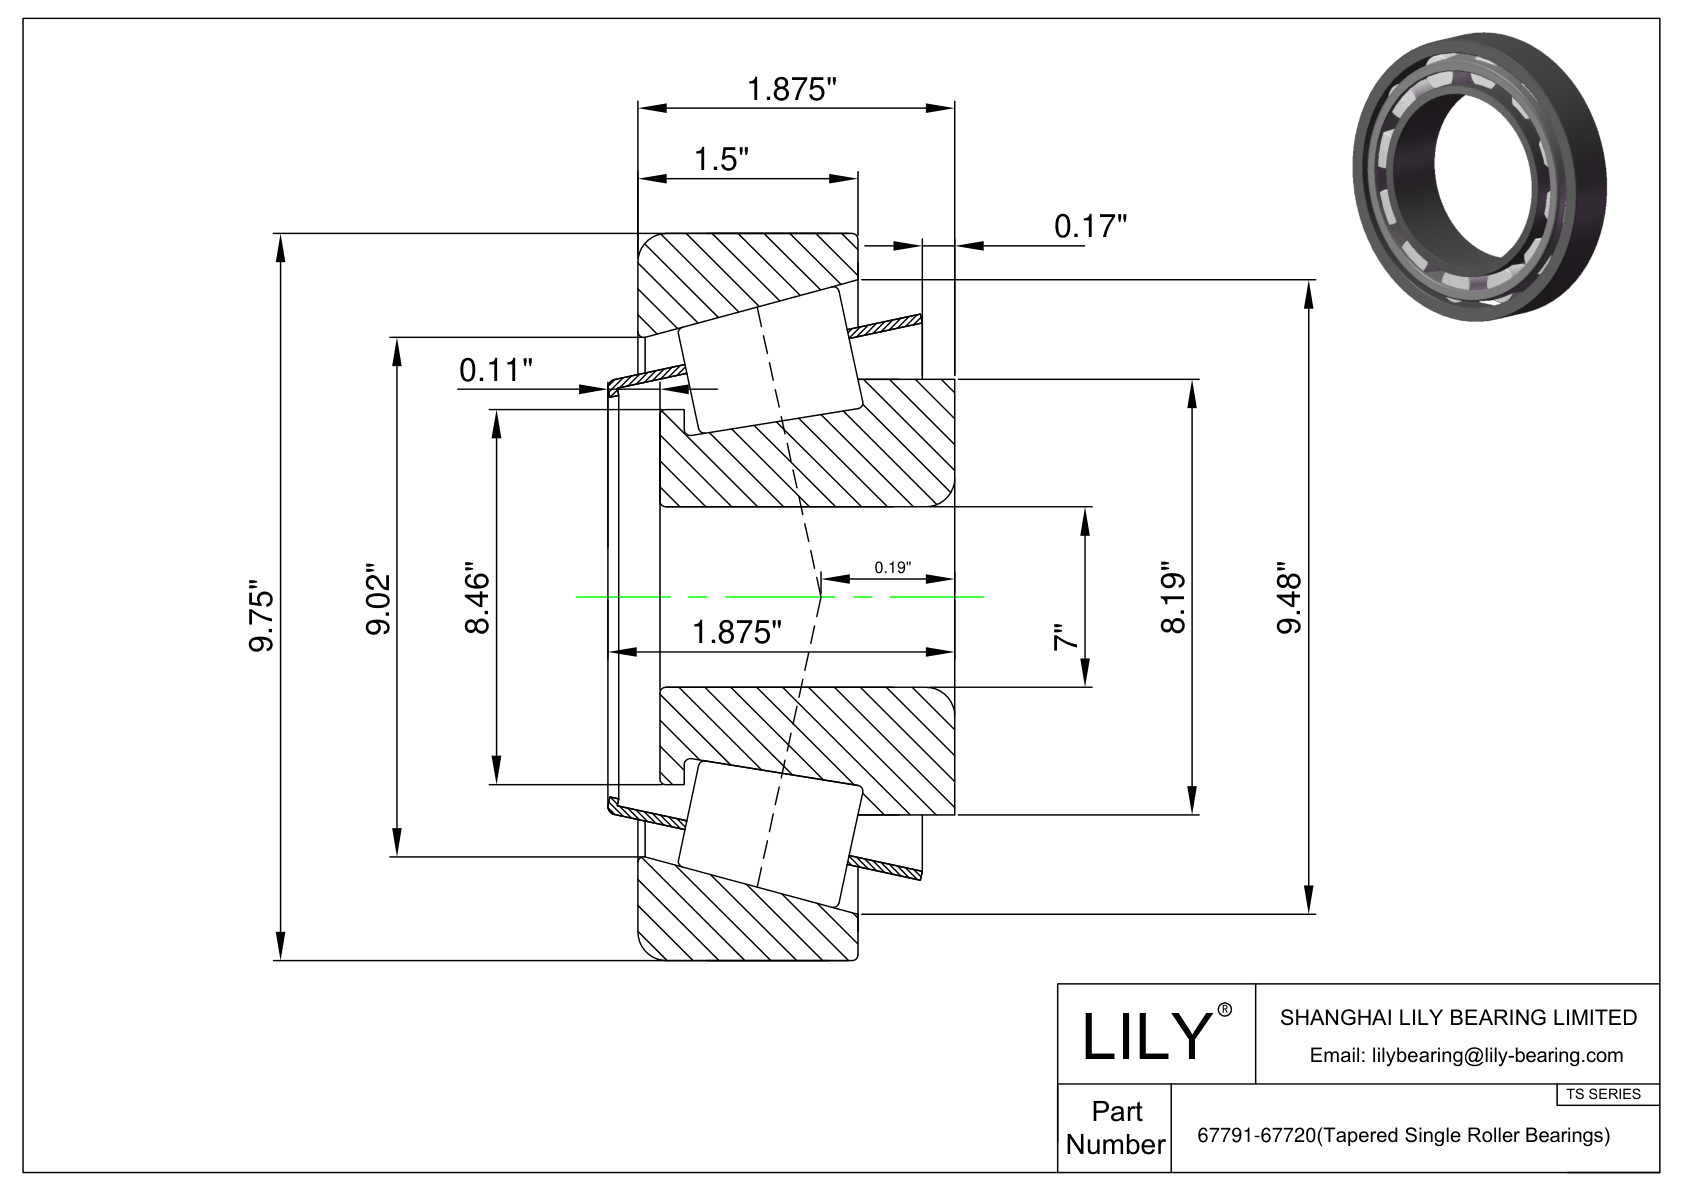 67791-67720 TS (Tapered Single Roller Bearings) (Imperial) cad drawing